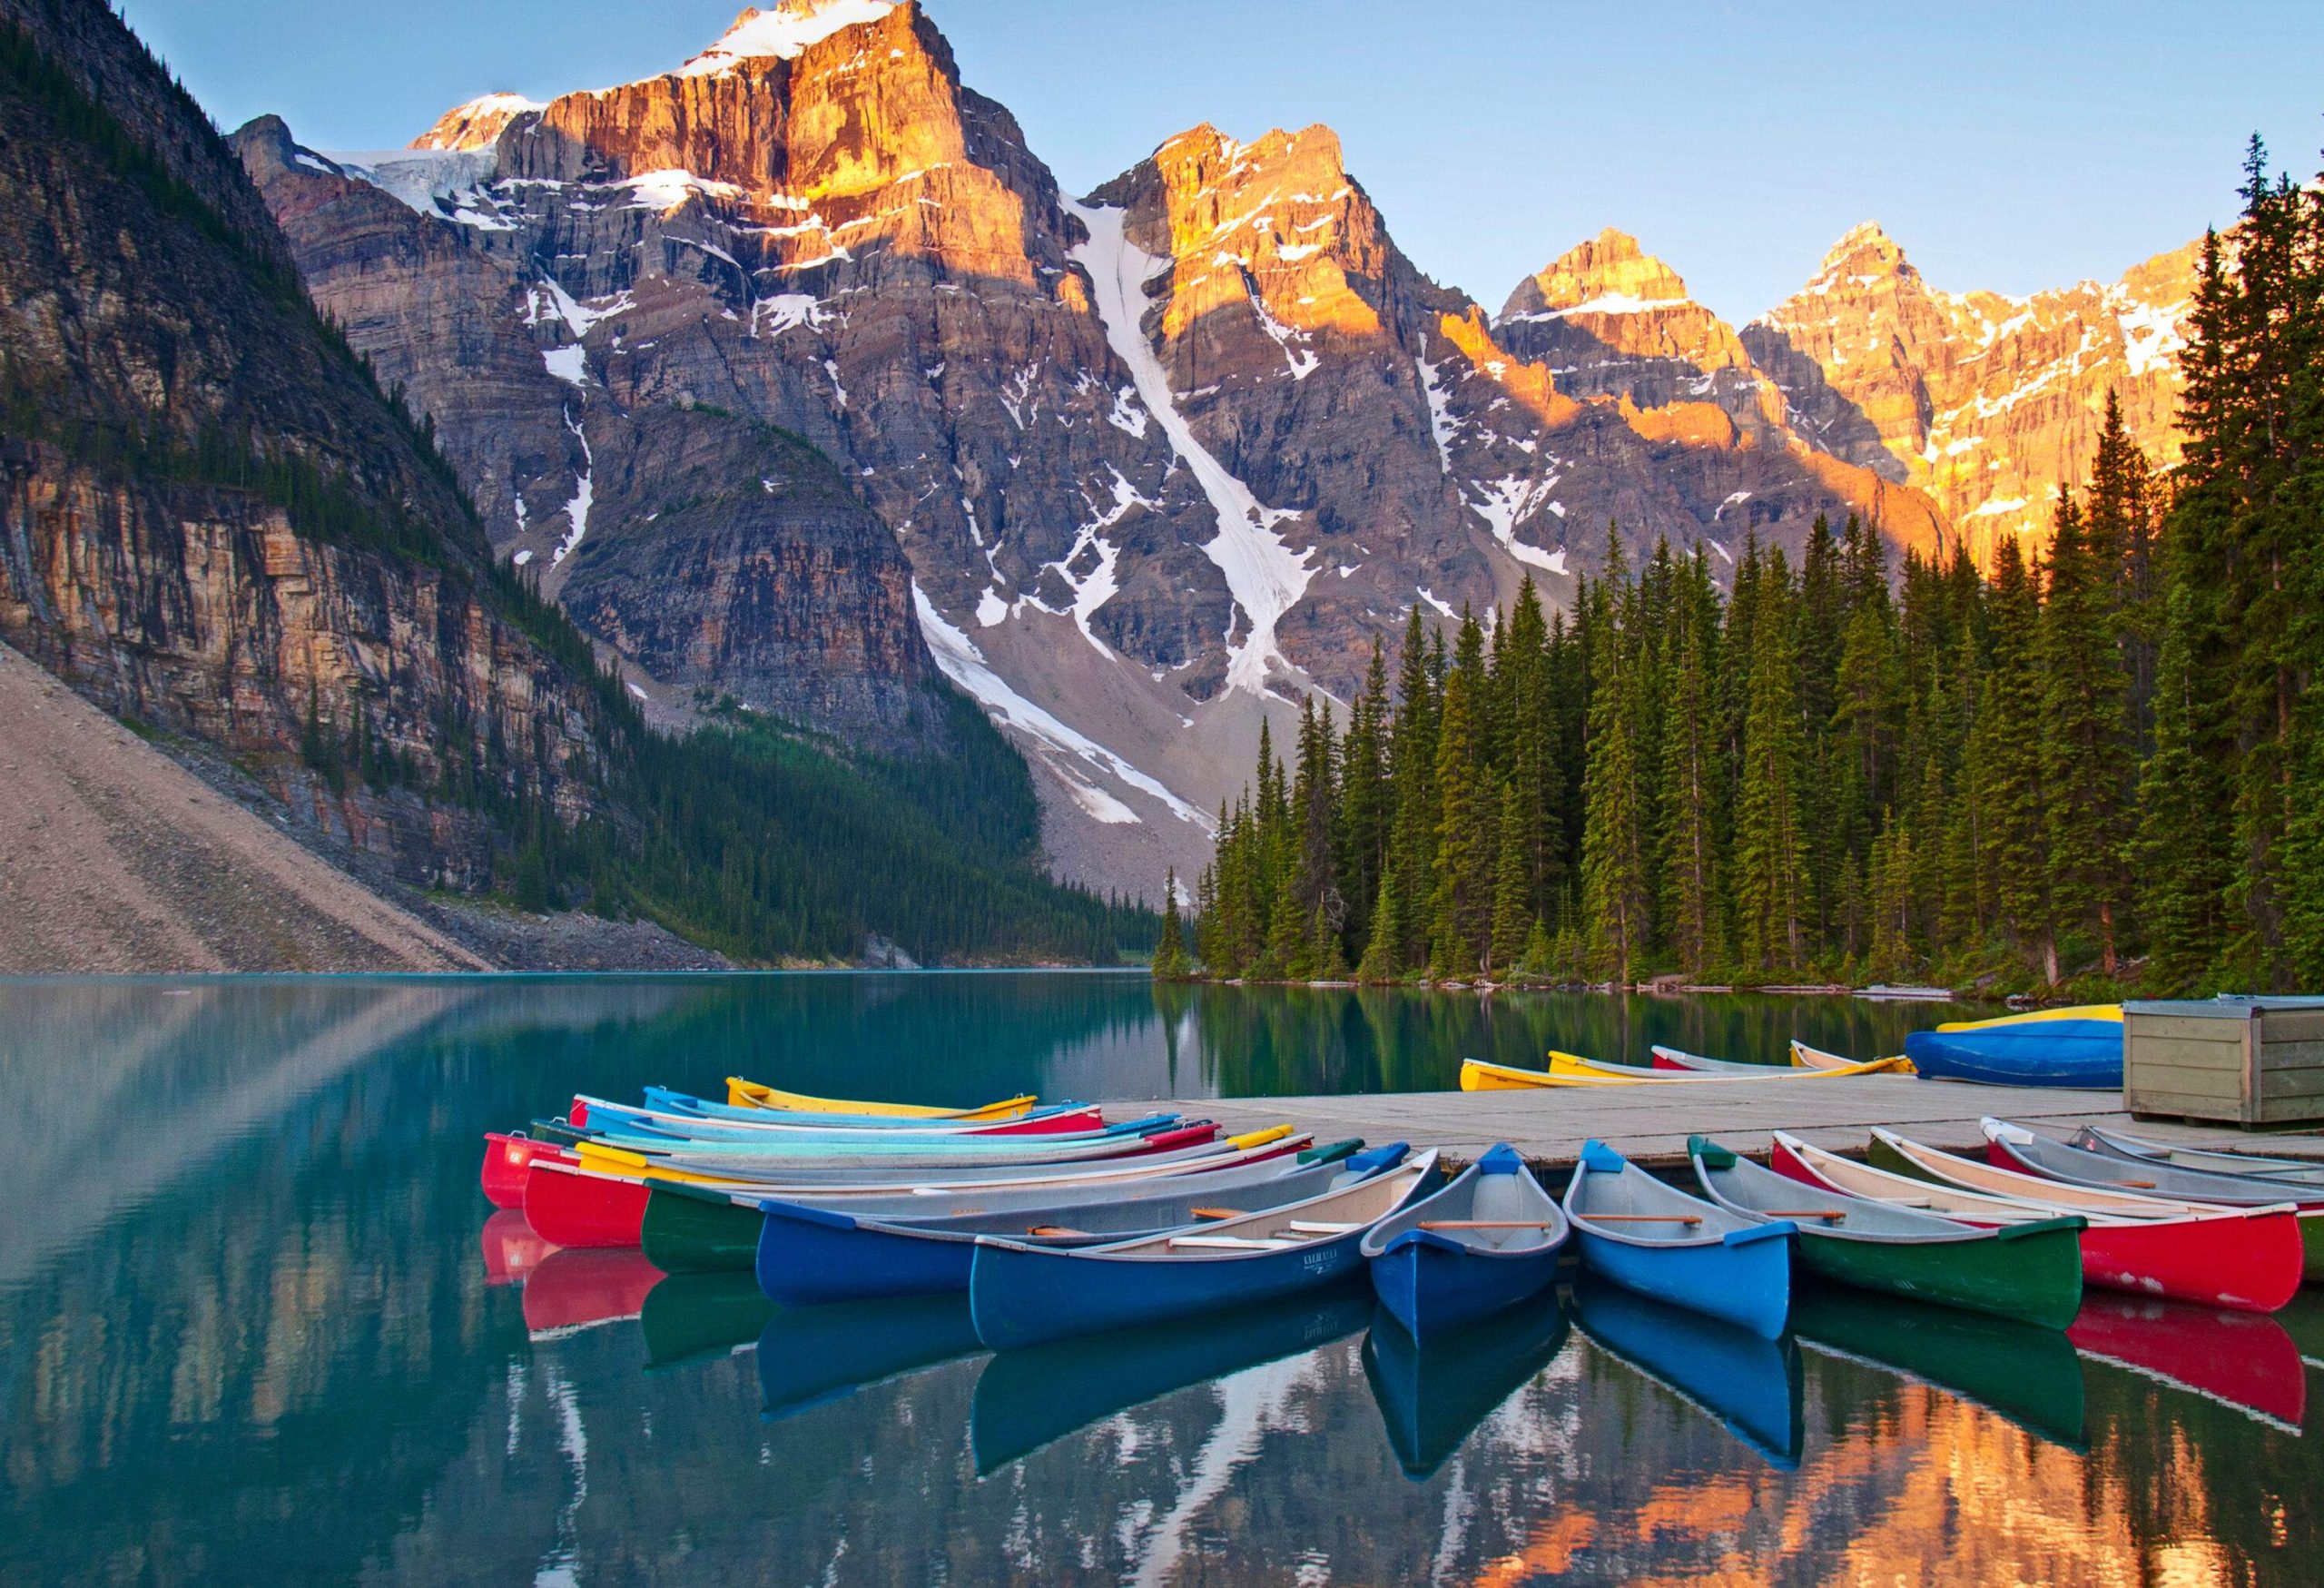 Colourful canoes surrounding a wooden dock on a lake nestled between snow-capped mountains and trees.